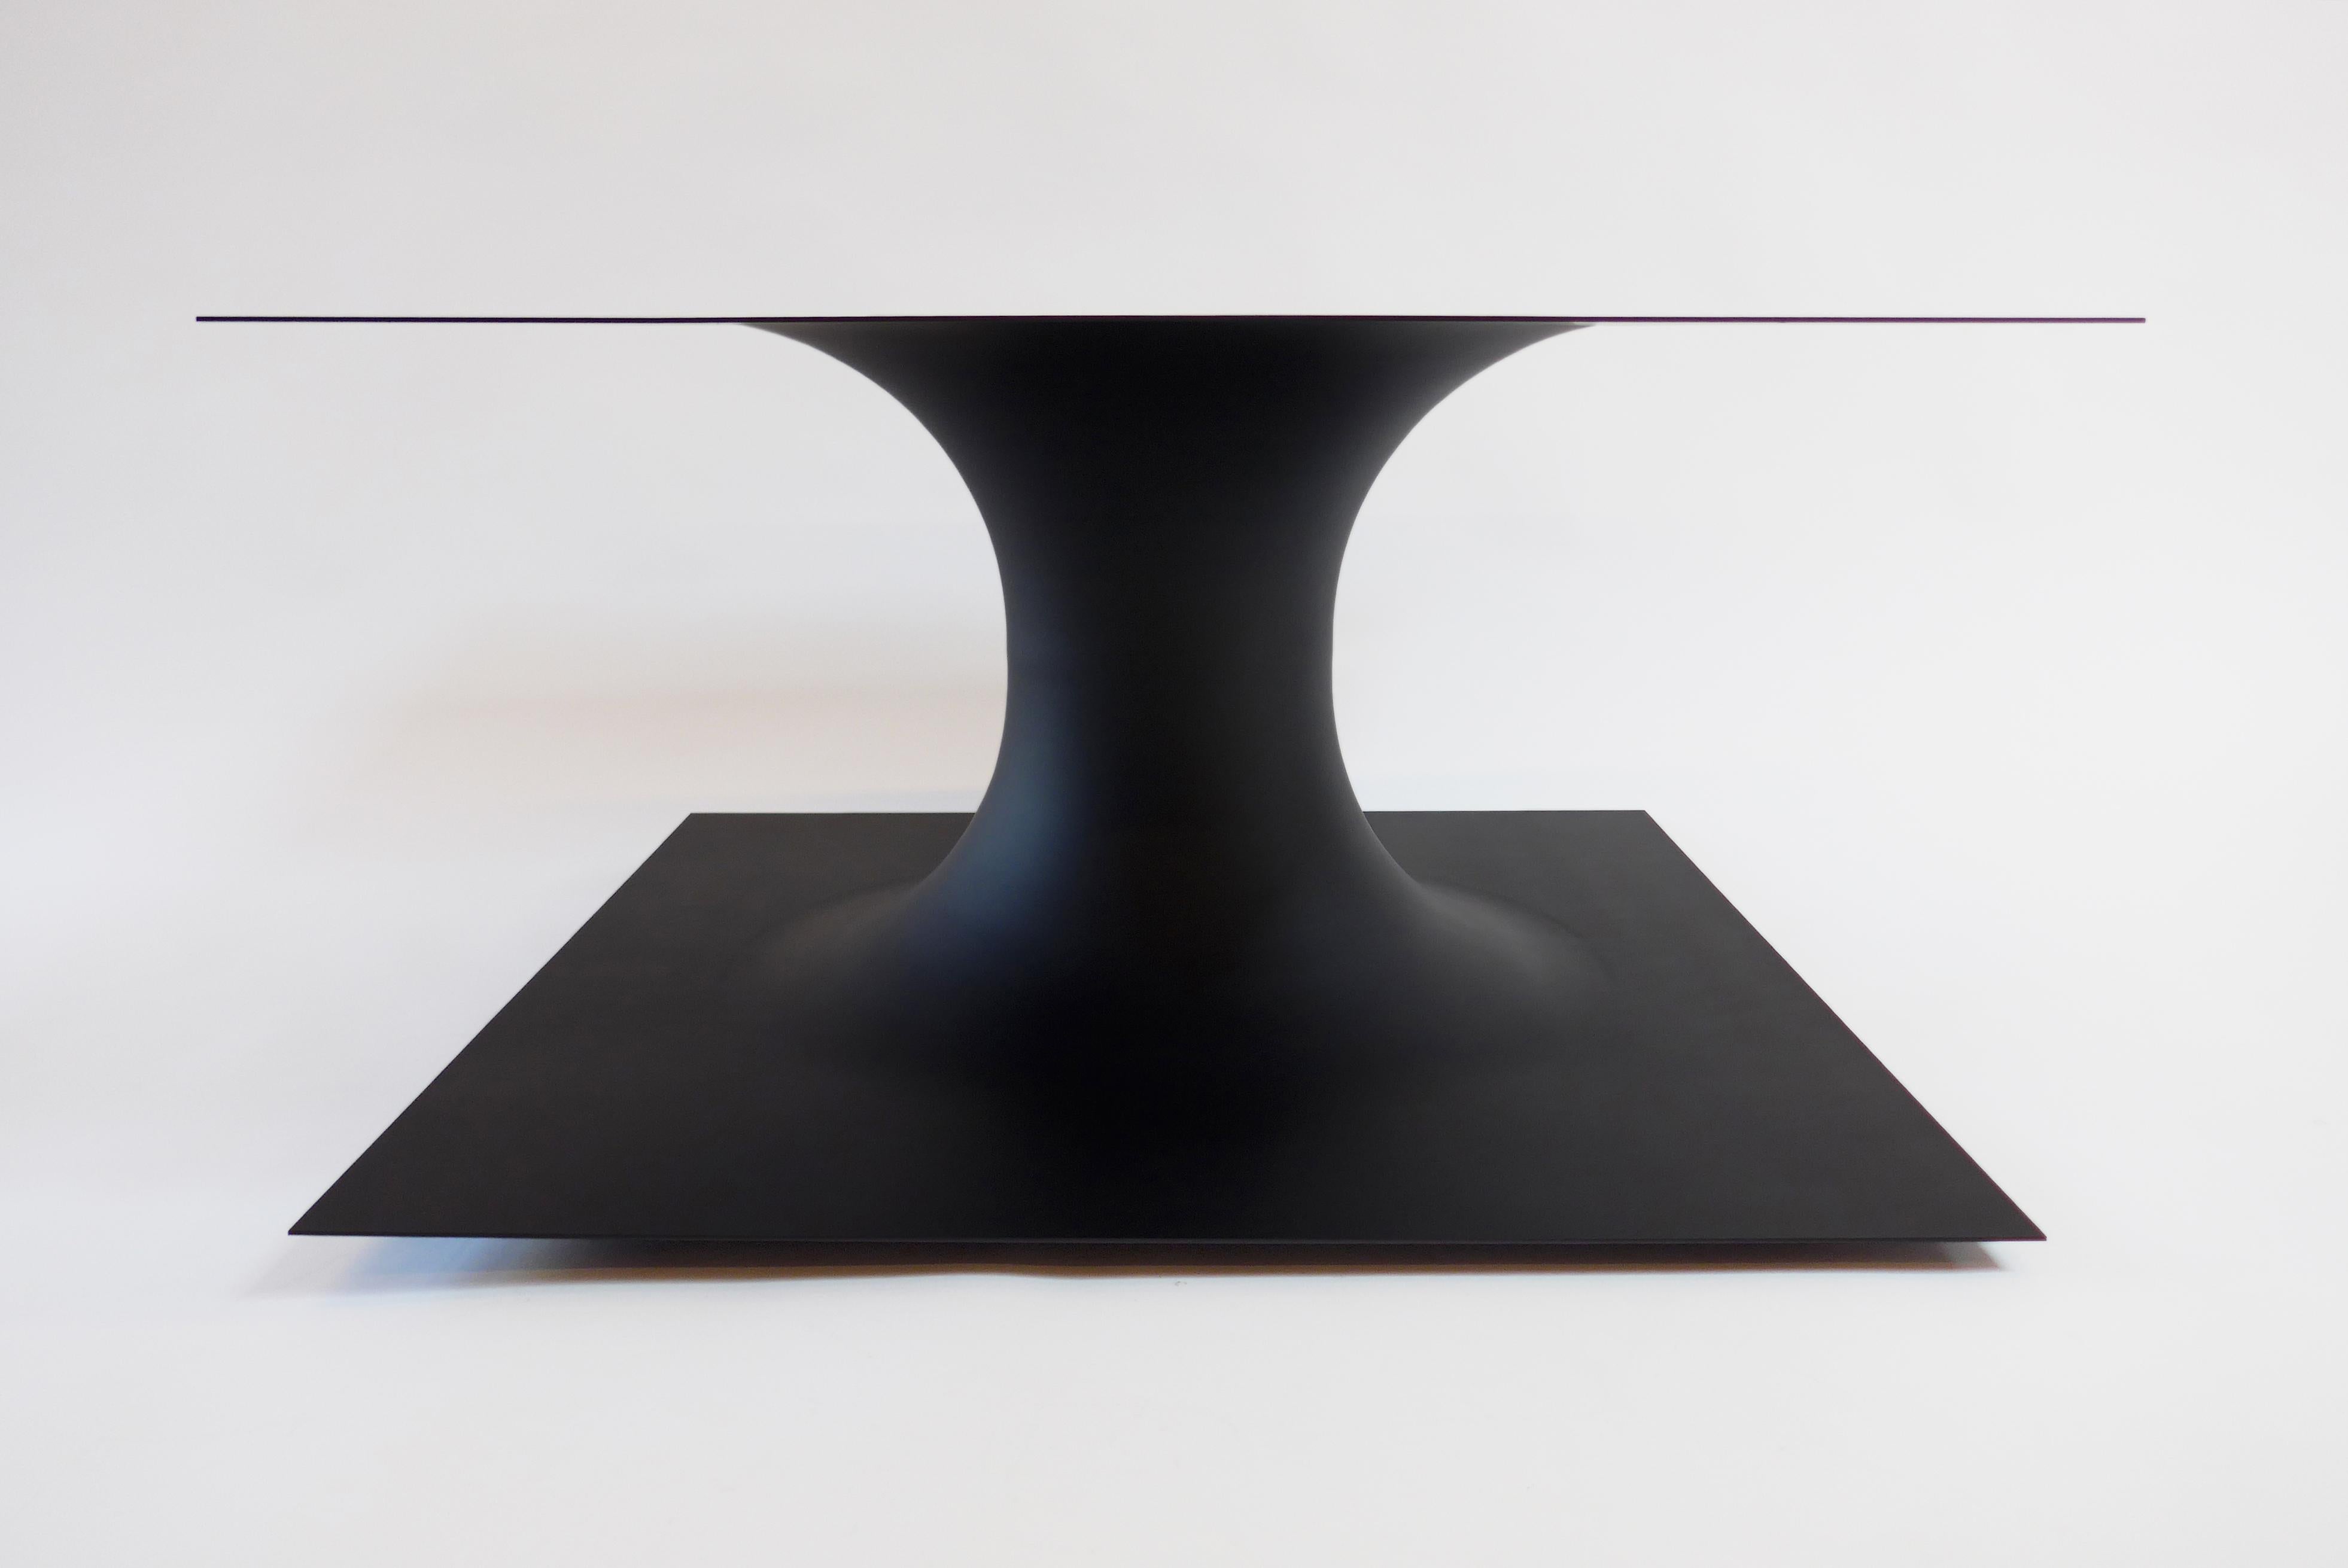 Anti-table is a Minimalist furniture piece designed by Brooklyn-based Erickson Aesthetics in ultra matte black enameled spun steel which evokes a three dimensional diagram of a wormhole. The simplistic form of this table is a composite of